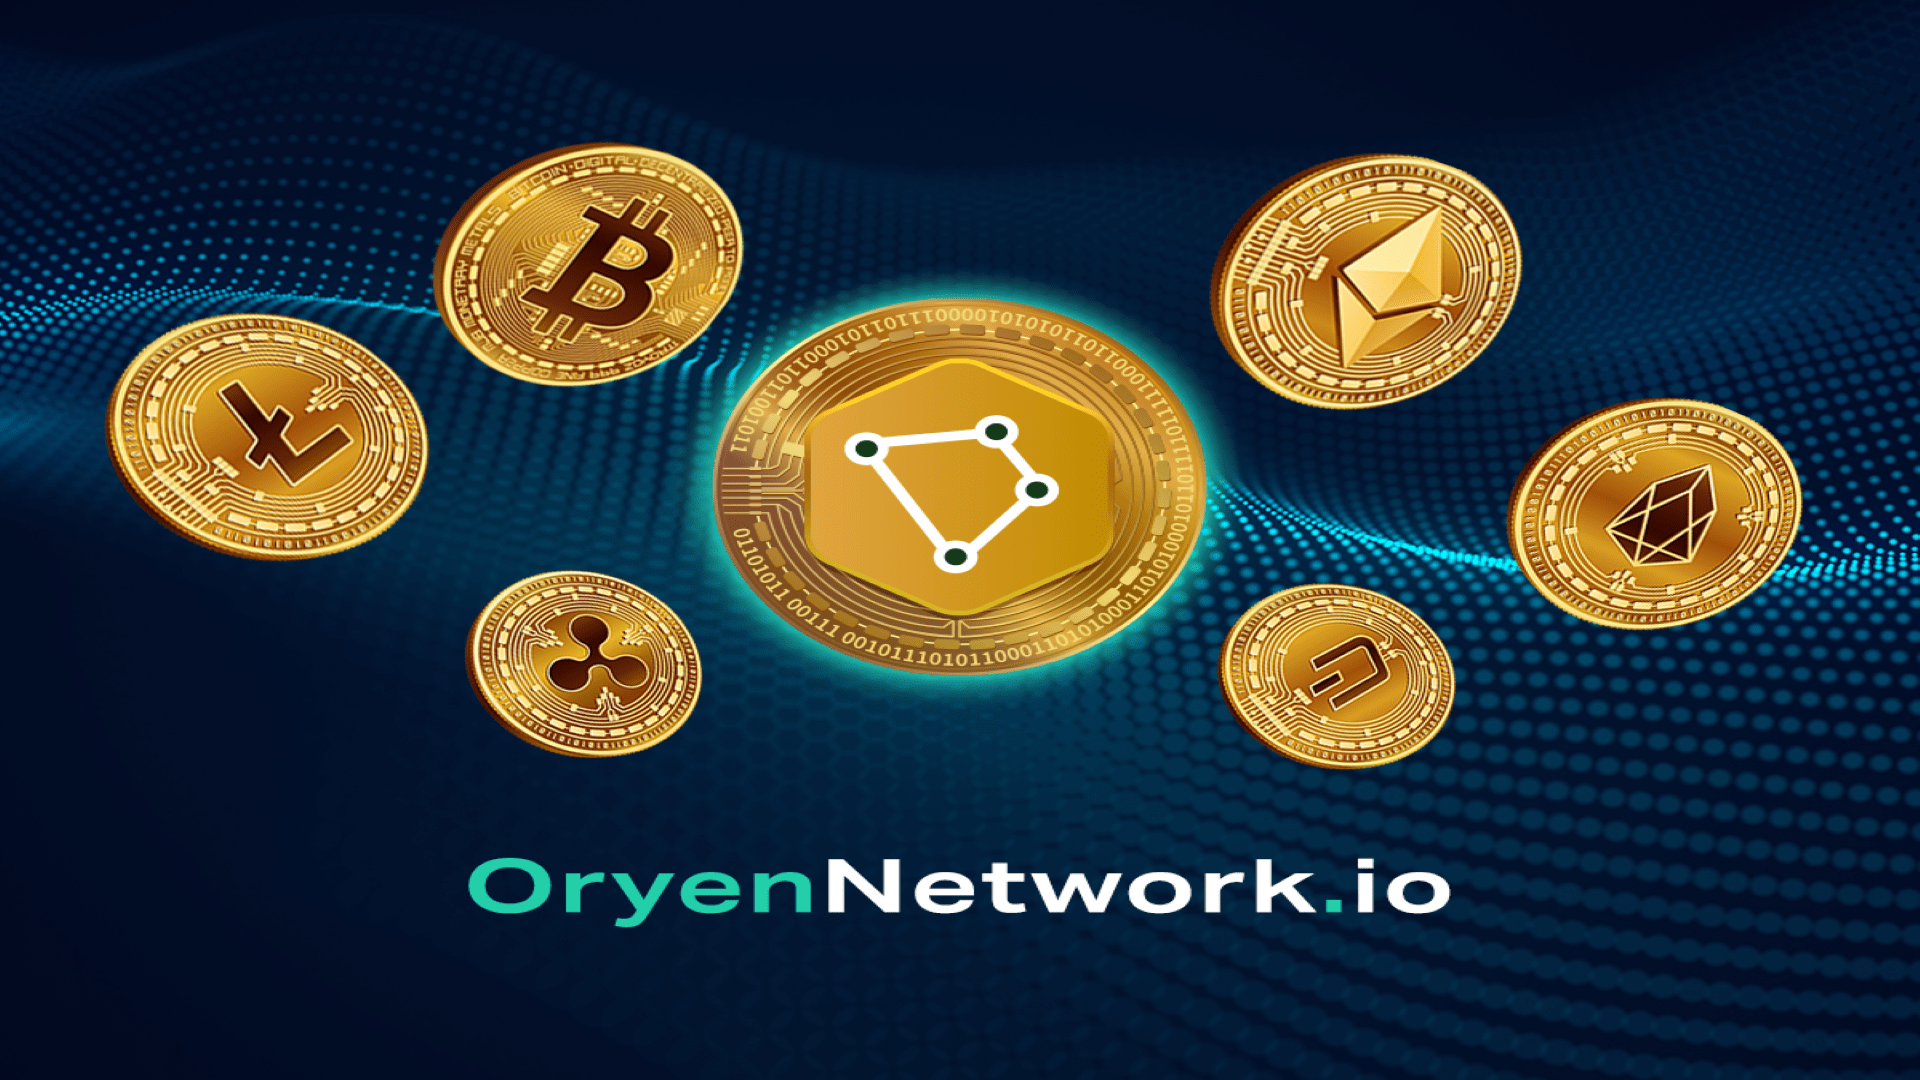 ICO In Bear Market Means The Only Way Is Up, Oryen Network Showing Optimism and Aptos How It’s Done